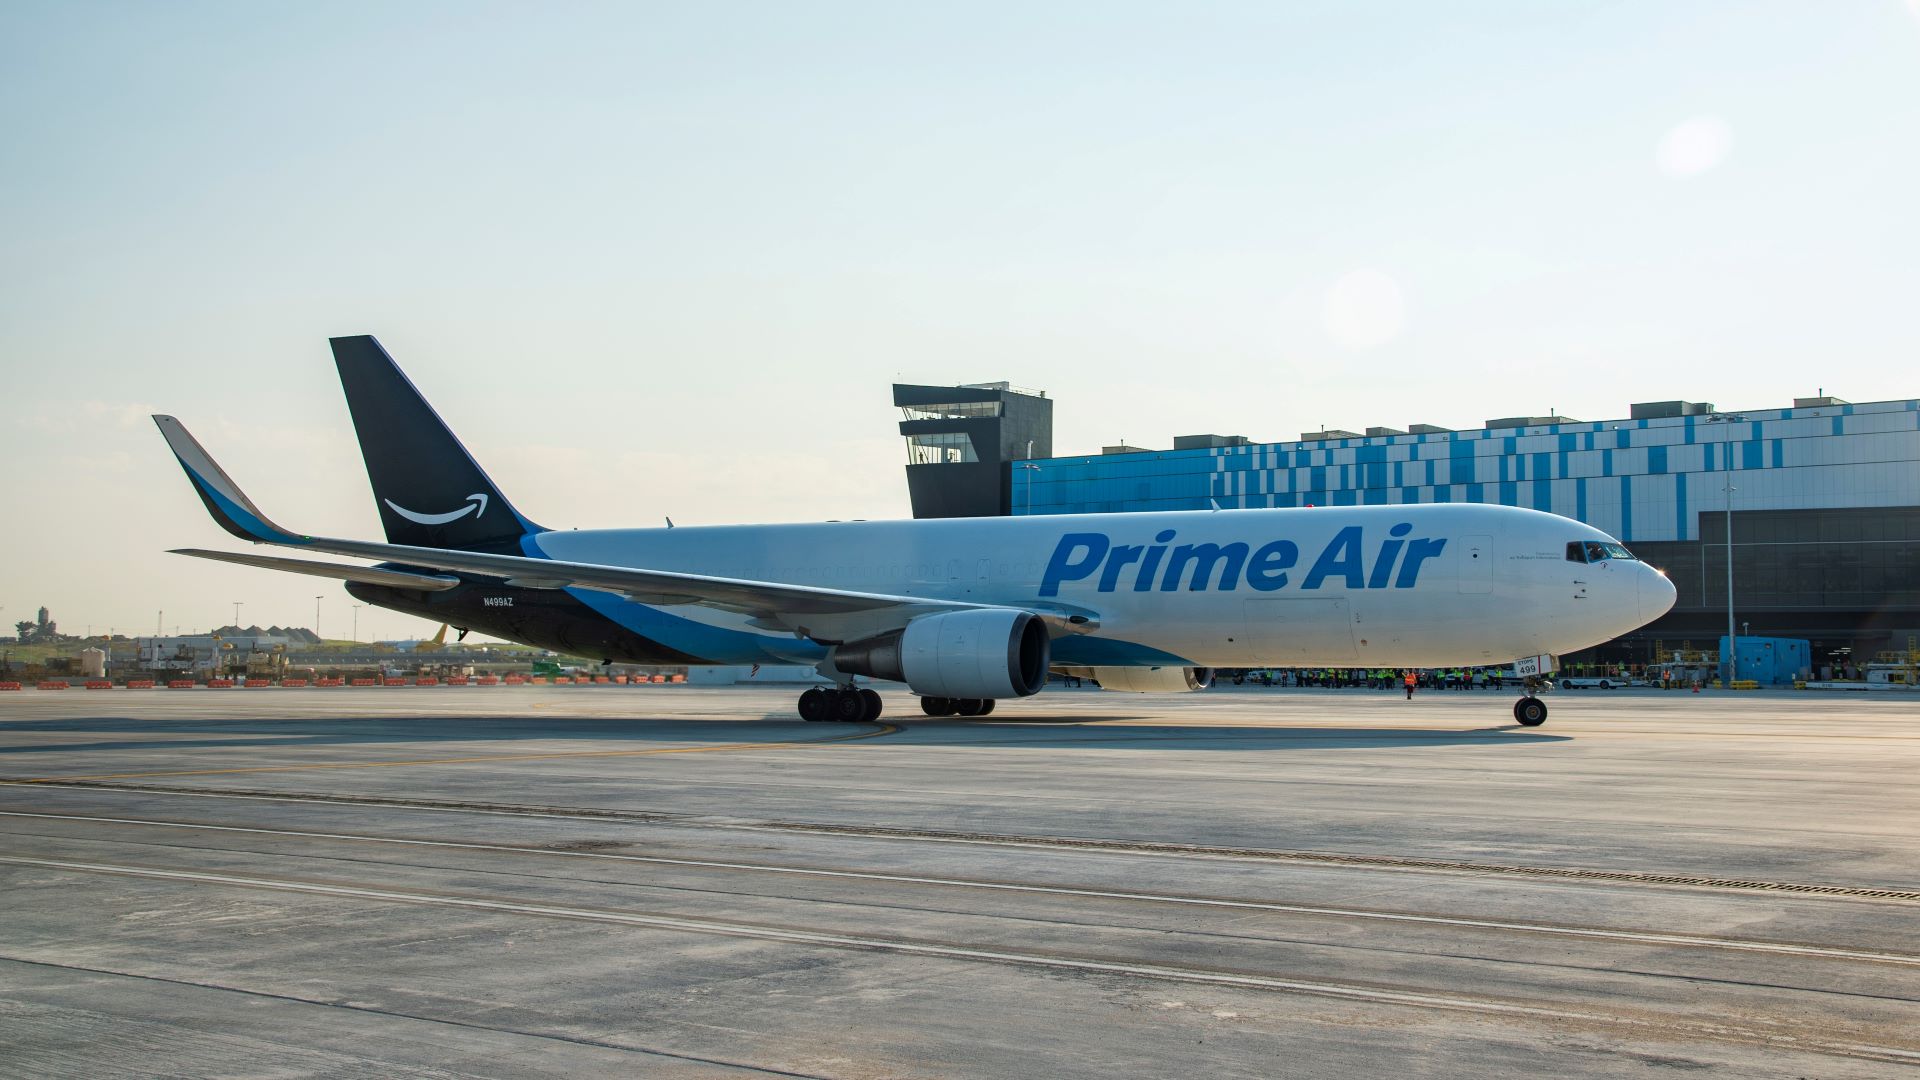 A white Amazon Prime jet with light blue accents rolls in front of a cargo building.